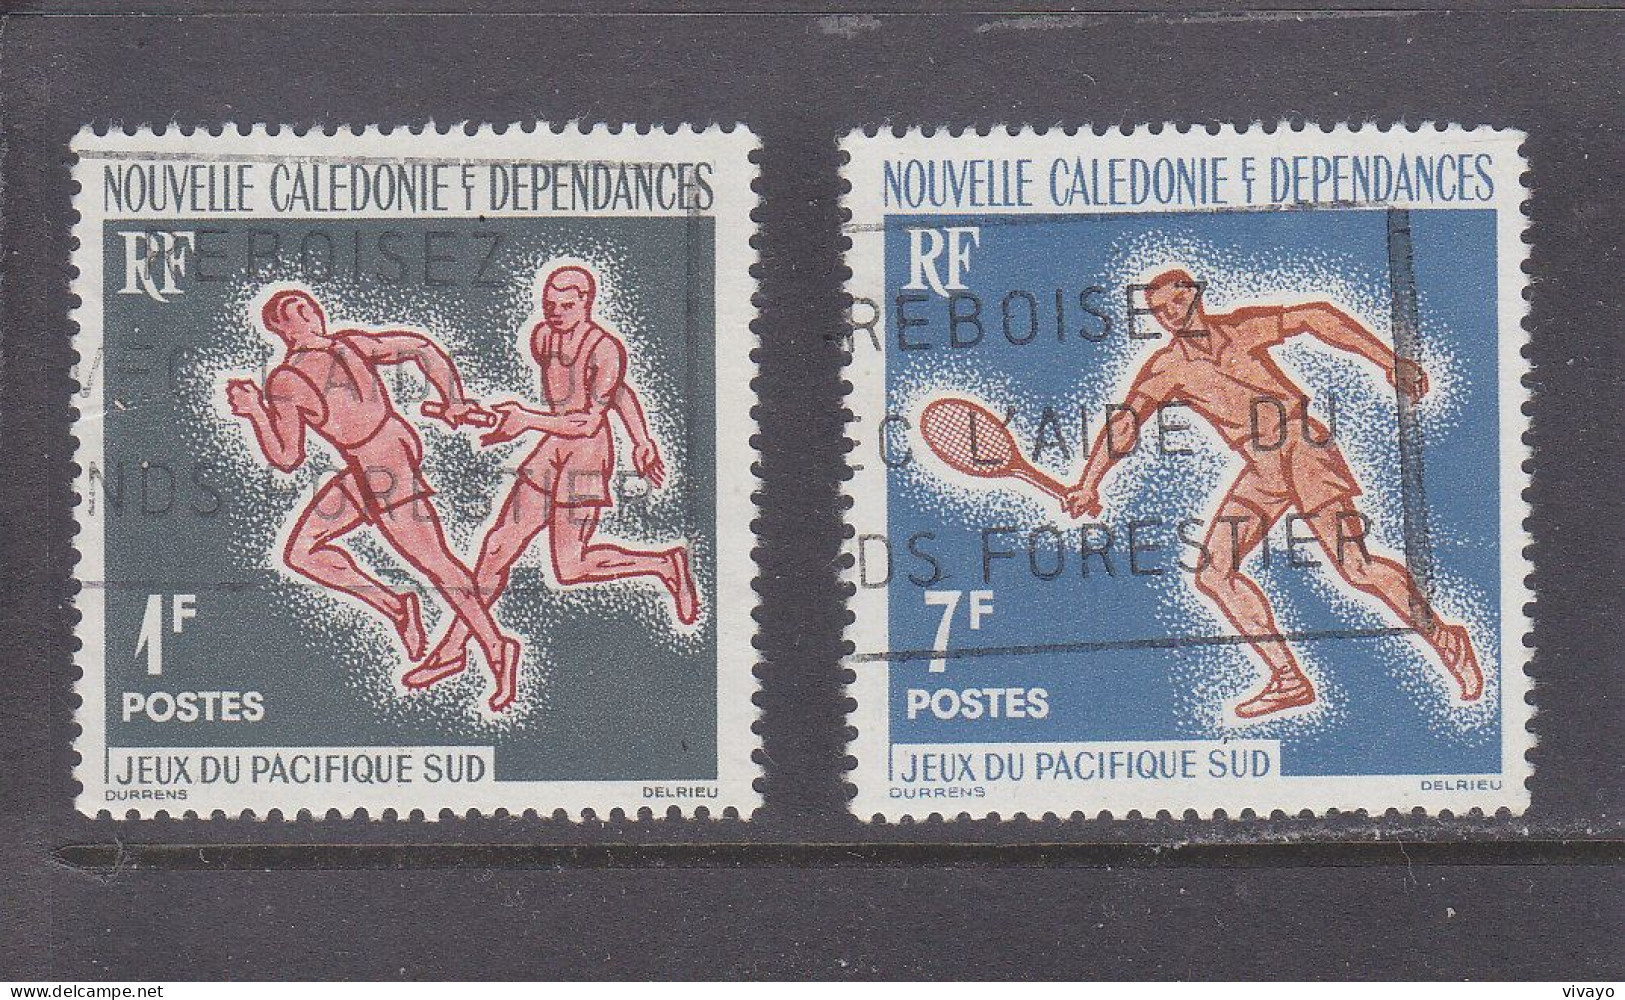 NOUVELLE CALEDONIE - O / FINE CANCELLED - 1963 - SOUTH PACIFIC GAMES -  Yv. 308/9  -   Mi. 388/9 - Gebruikt